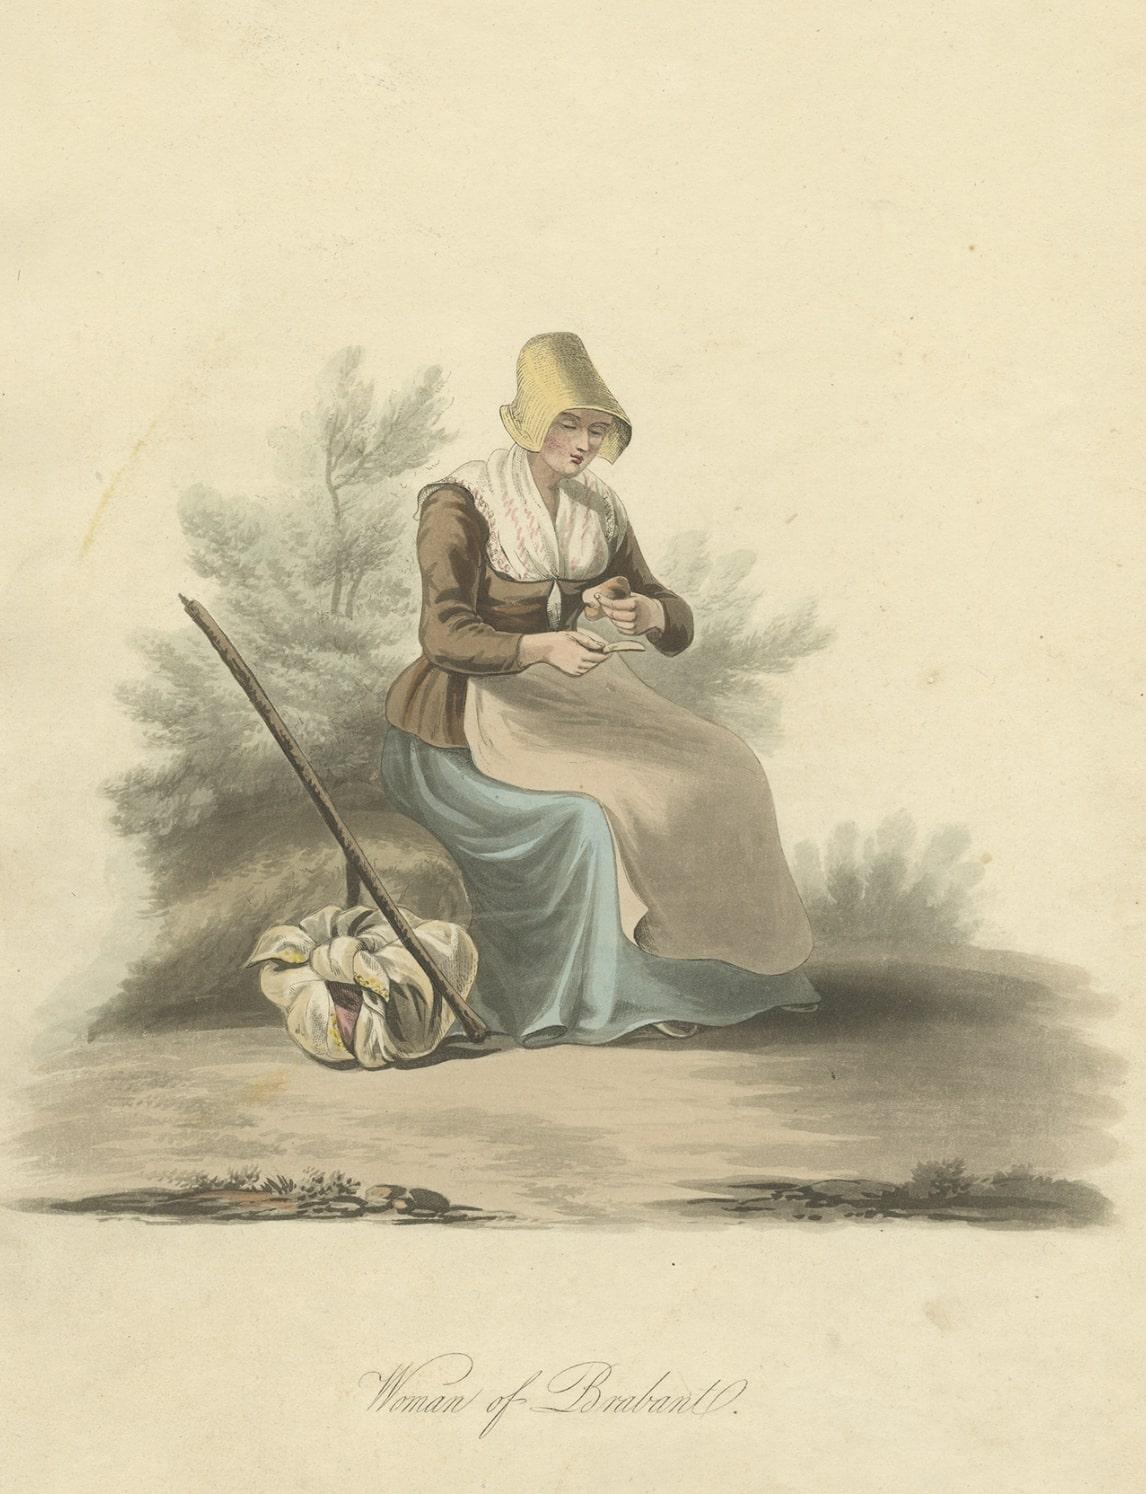 Paper Antique Handcolored Engraving of a Woman of Brabant, the Netherlands, 1817 For Sale